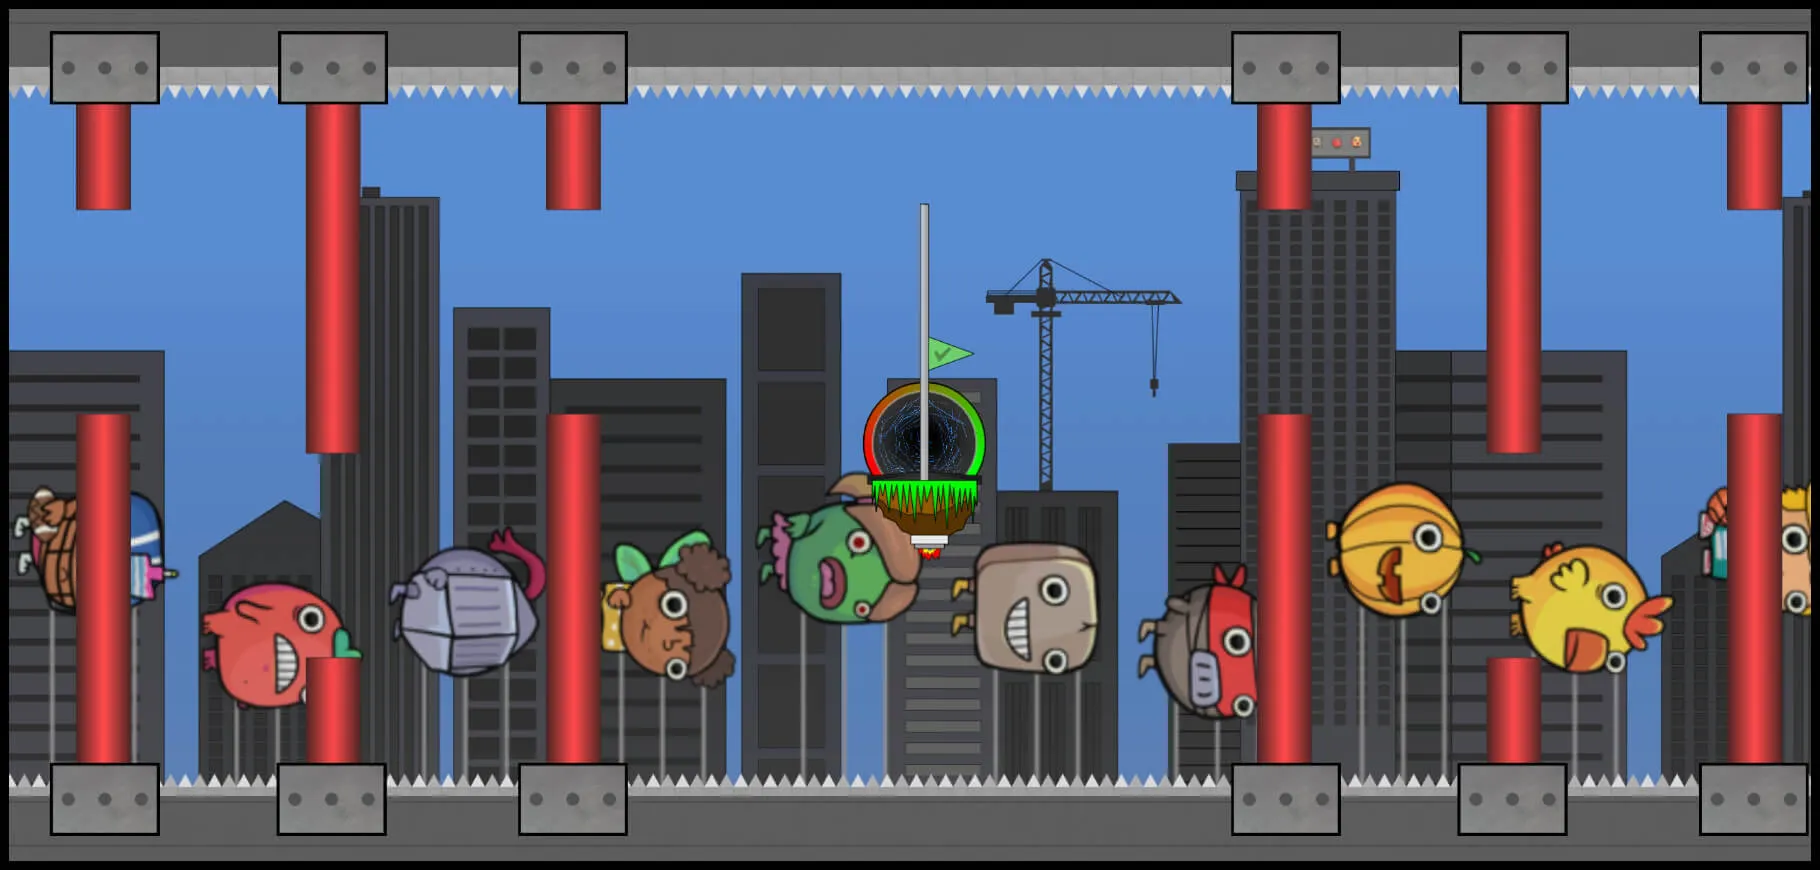 my first checkpoint level screenshot from the game reflex runner.